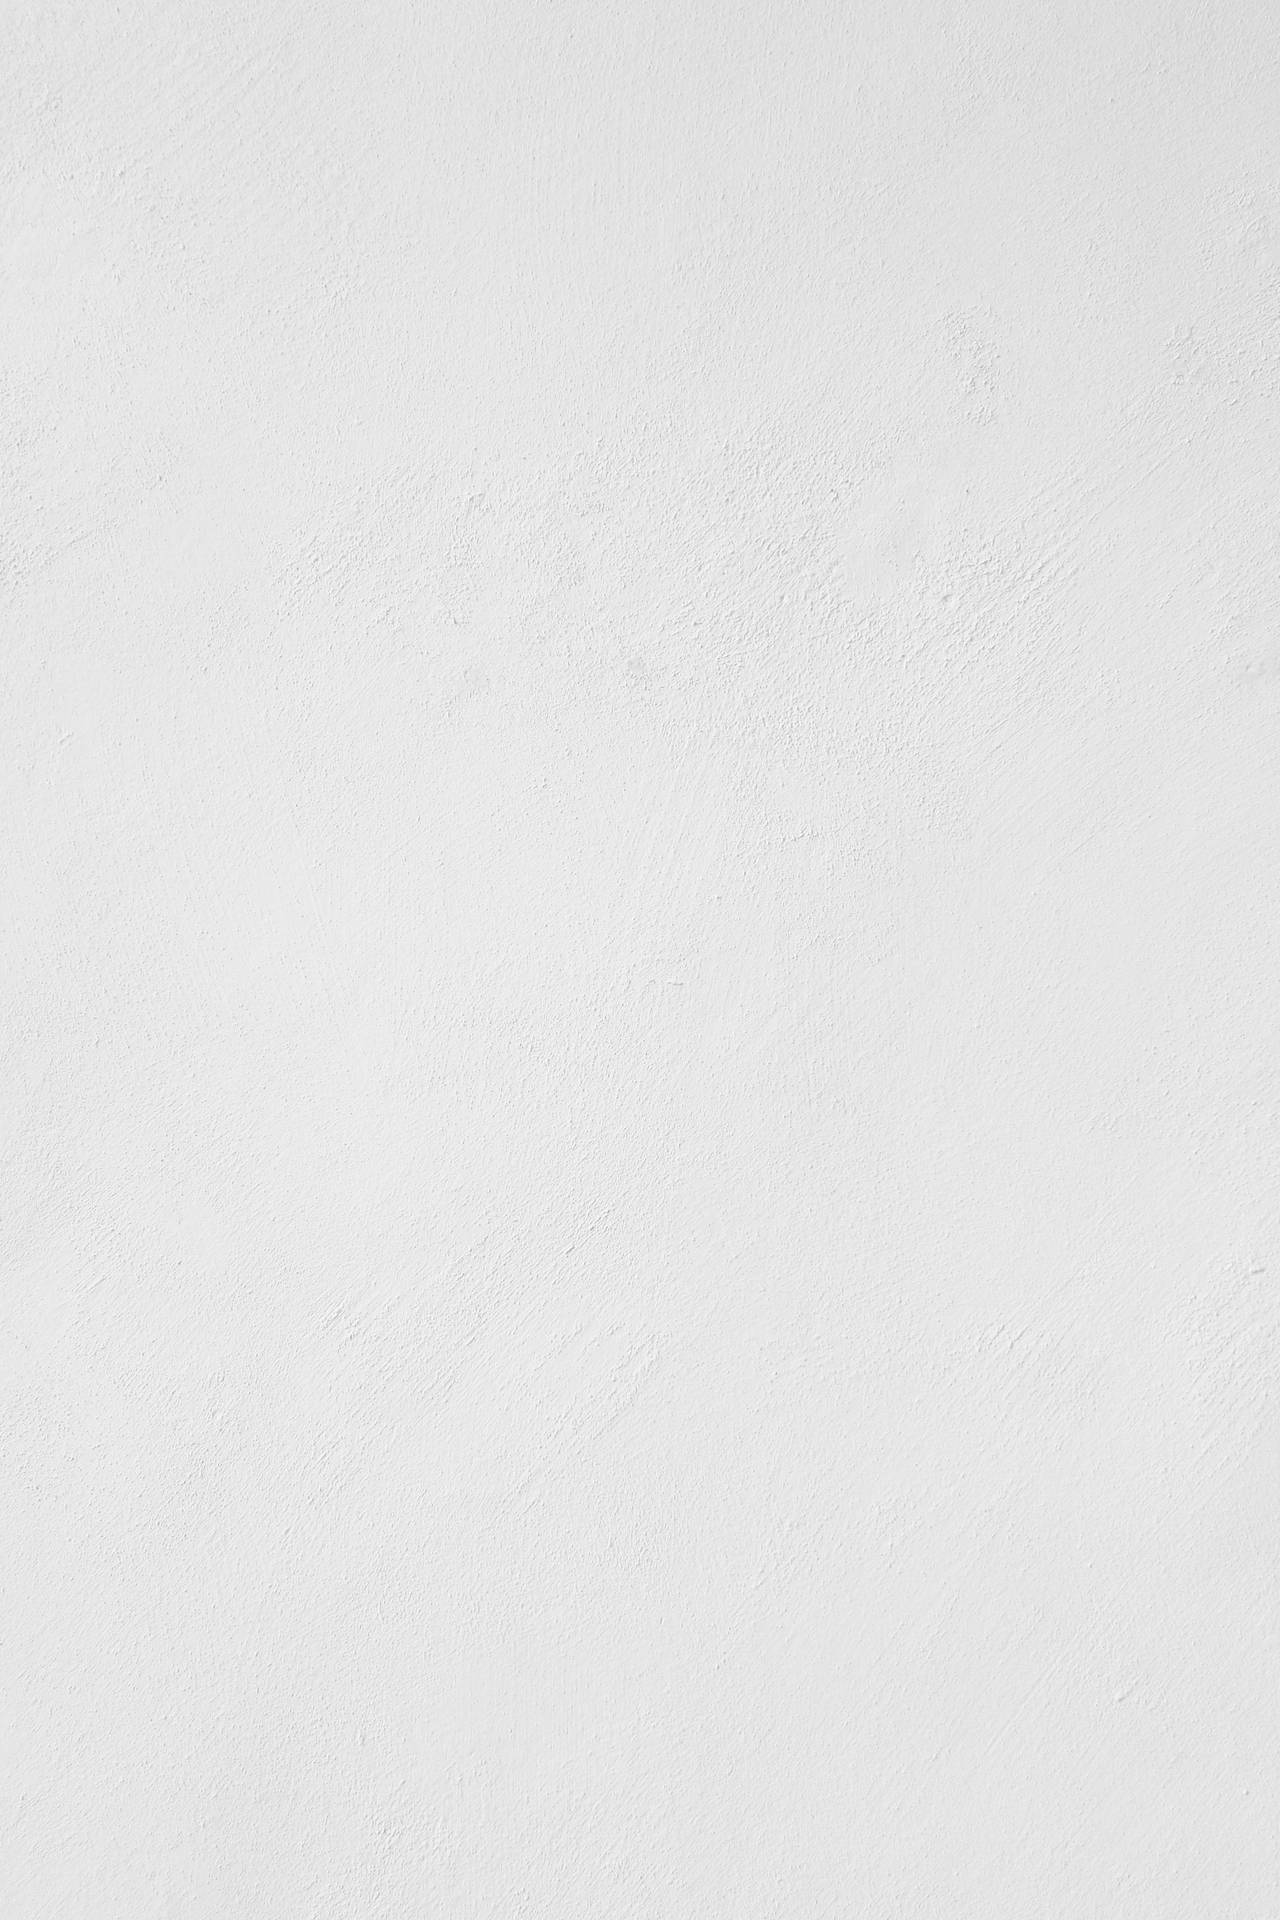 3456X5184 Gray Wallpaper and Background